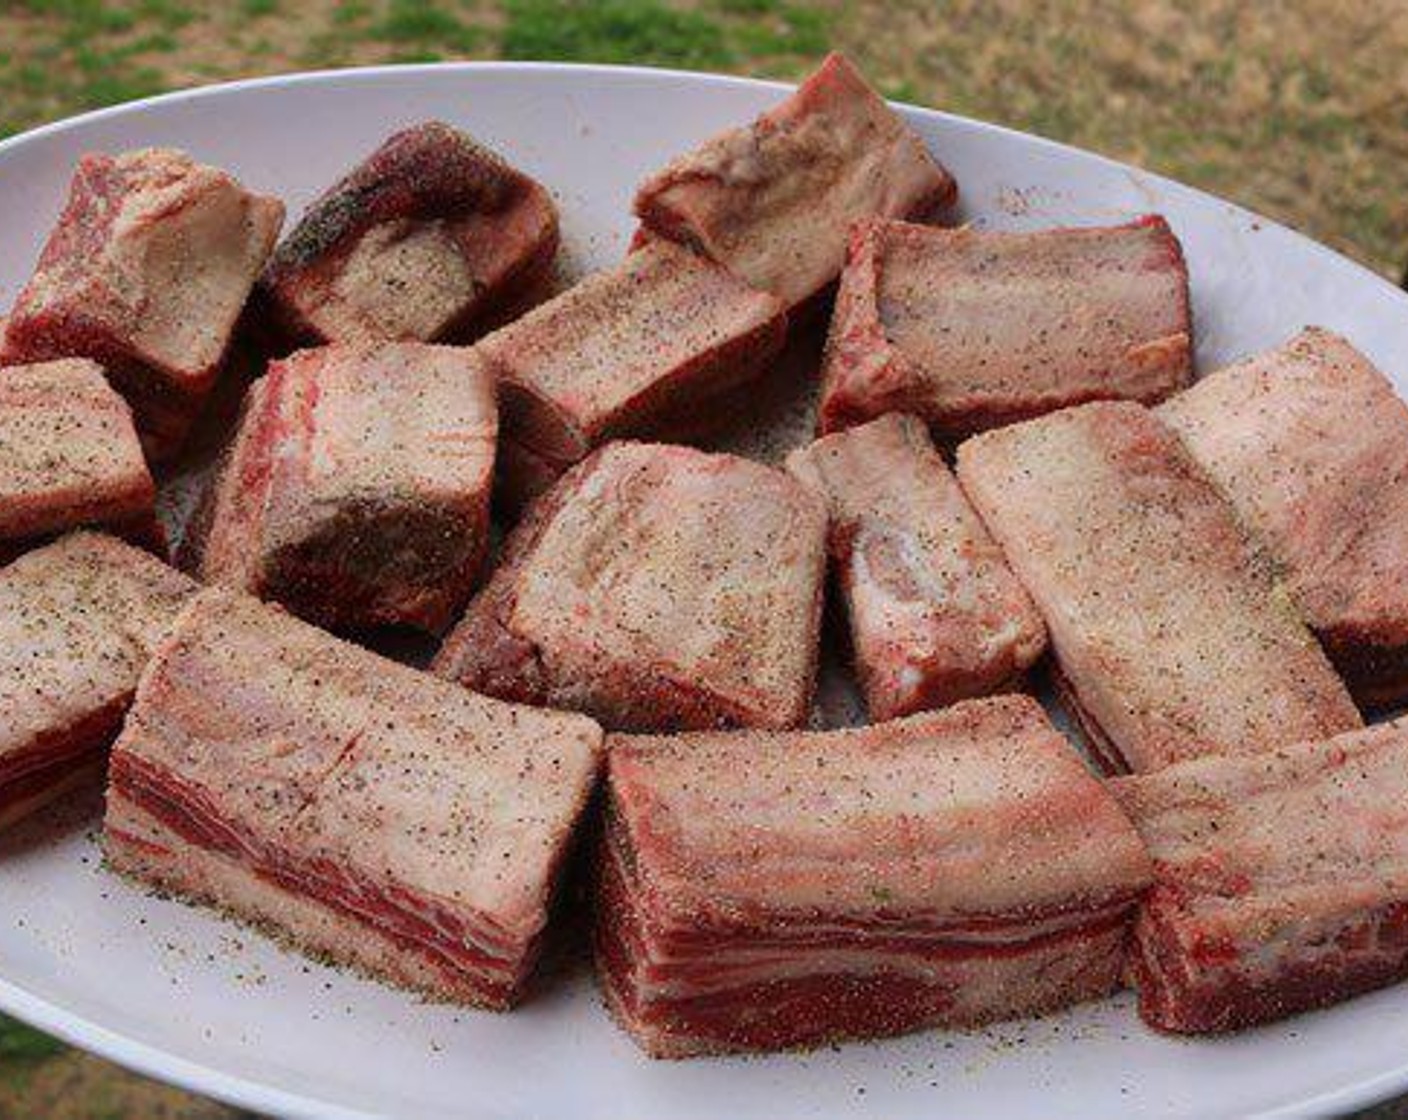 step 2 Season outside of Beef Short Ribs (12) with All-Purpose Spice Rub (1/2 Tbsp). Place on pit and smoke for 3 hrs until brown on all sides.